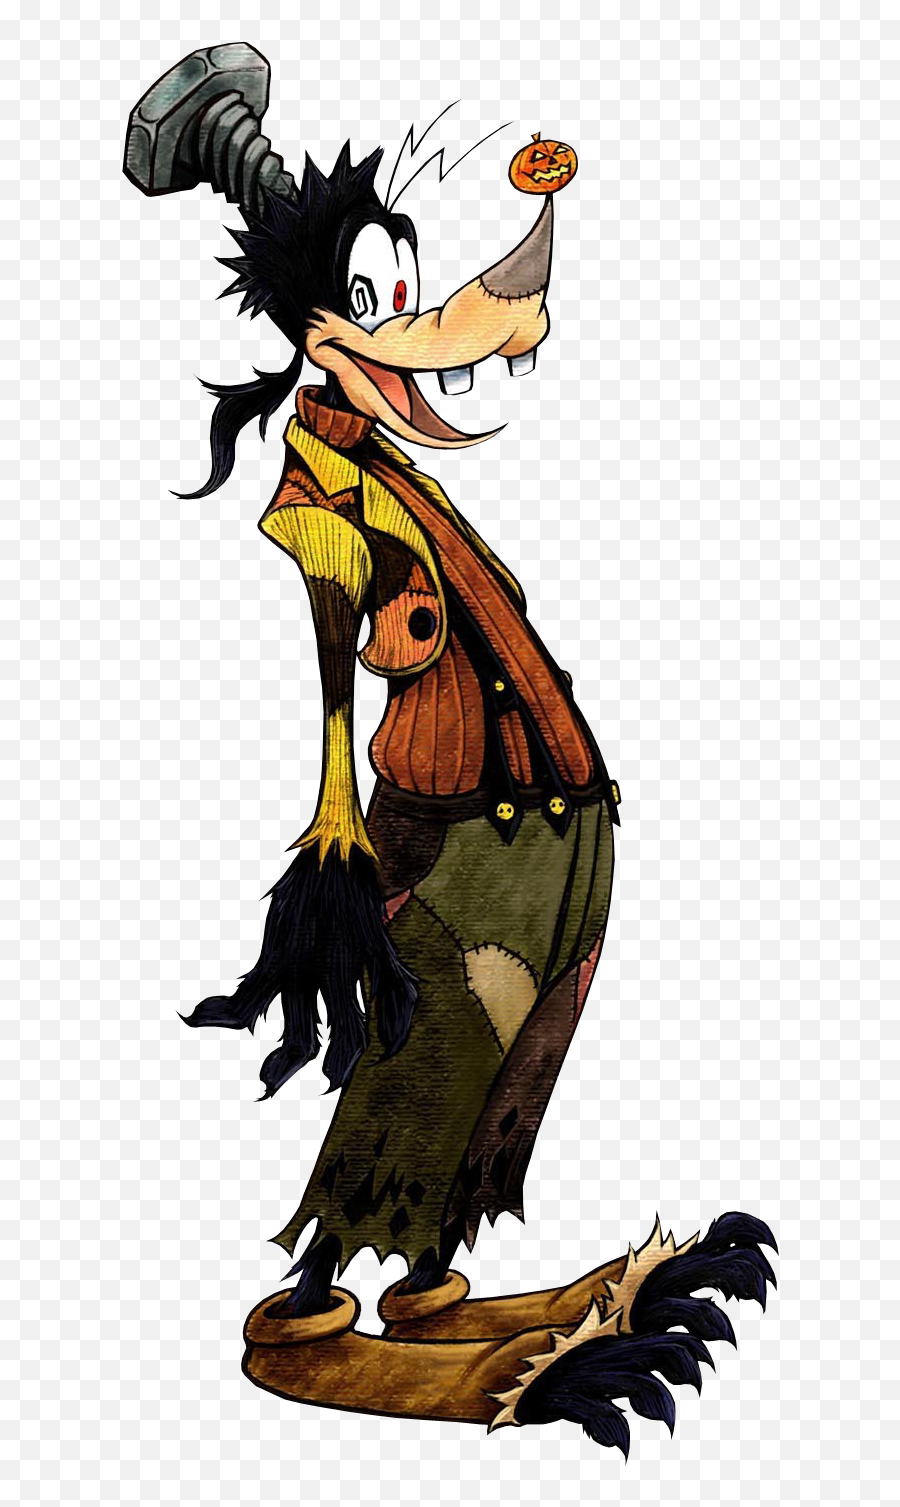 Goofy Png Transparent Images - Kingdom Hearts Halloween Town Costume,Goofy Transparent